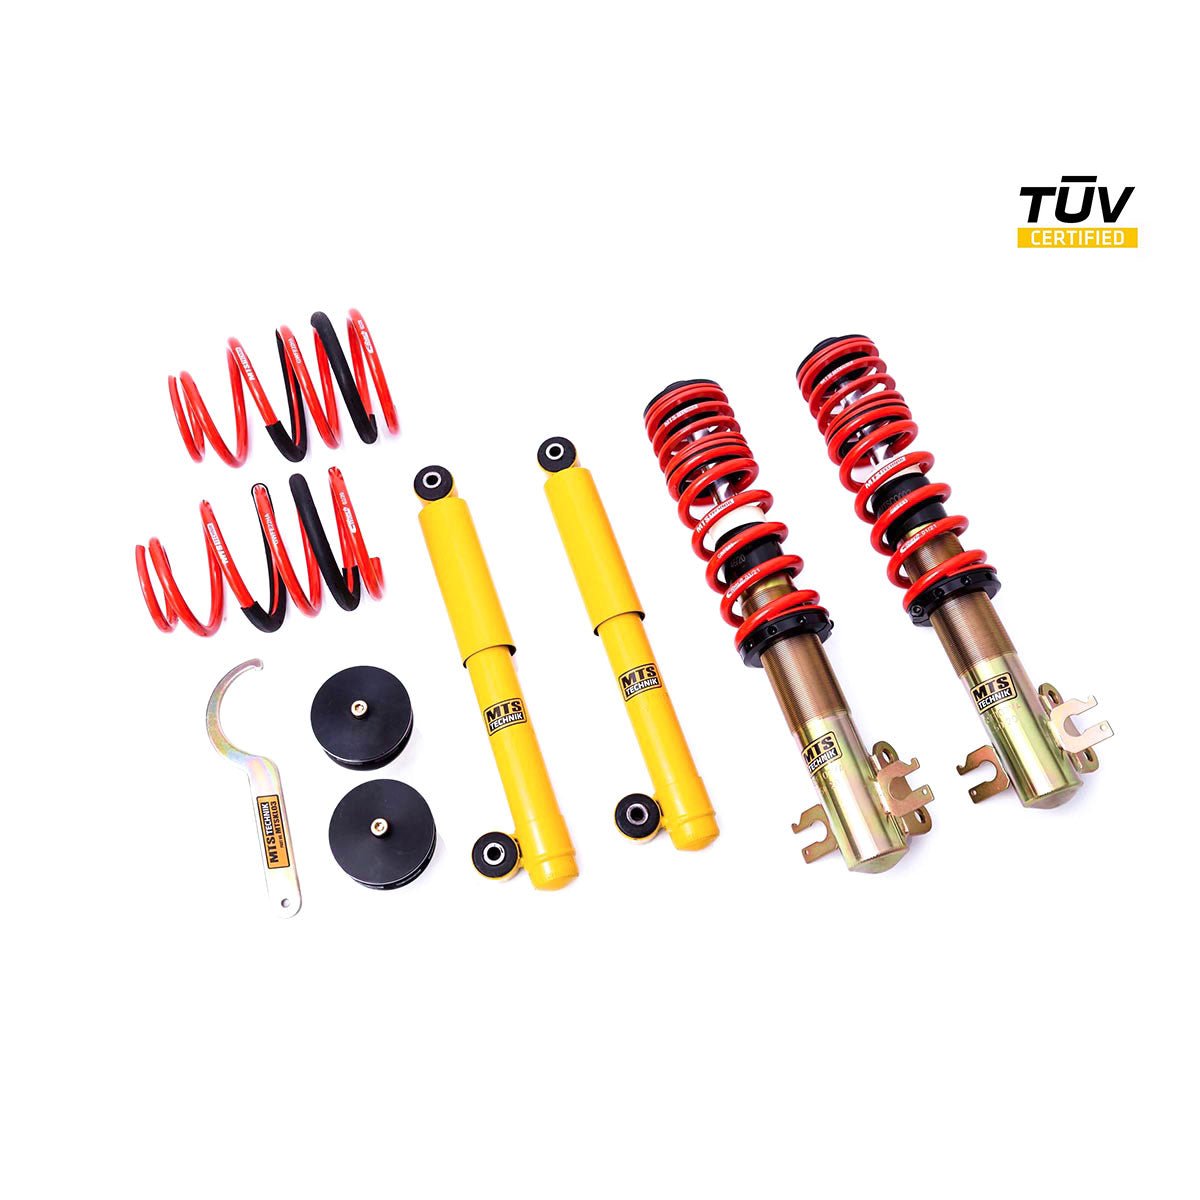 MTS TECHNIK coilover kit SPORT Fiat Seicento (with TÜV) - PARTS33 GmbH